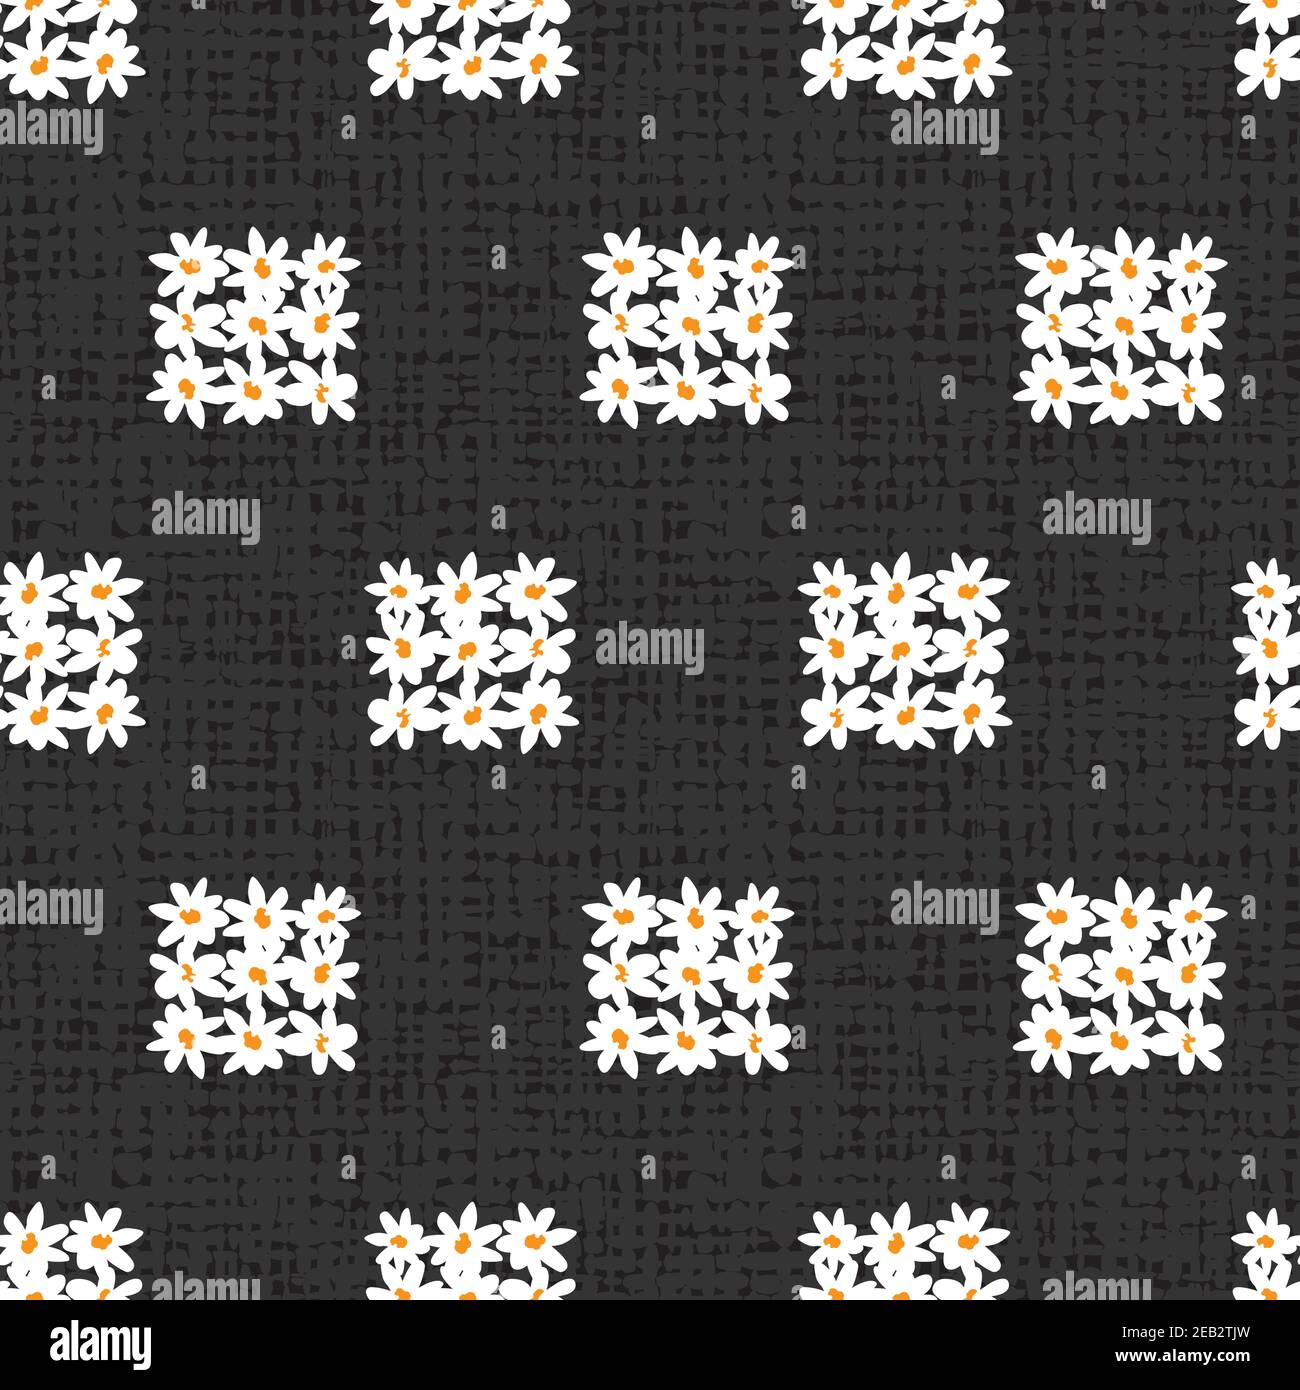 Vector black fun daisy flowers elegant squares repeat pattern with dark grey canvas background. Suitable for textile, gift wrap and wallpaper. Stock Vector